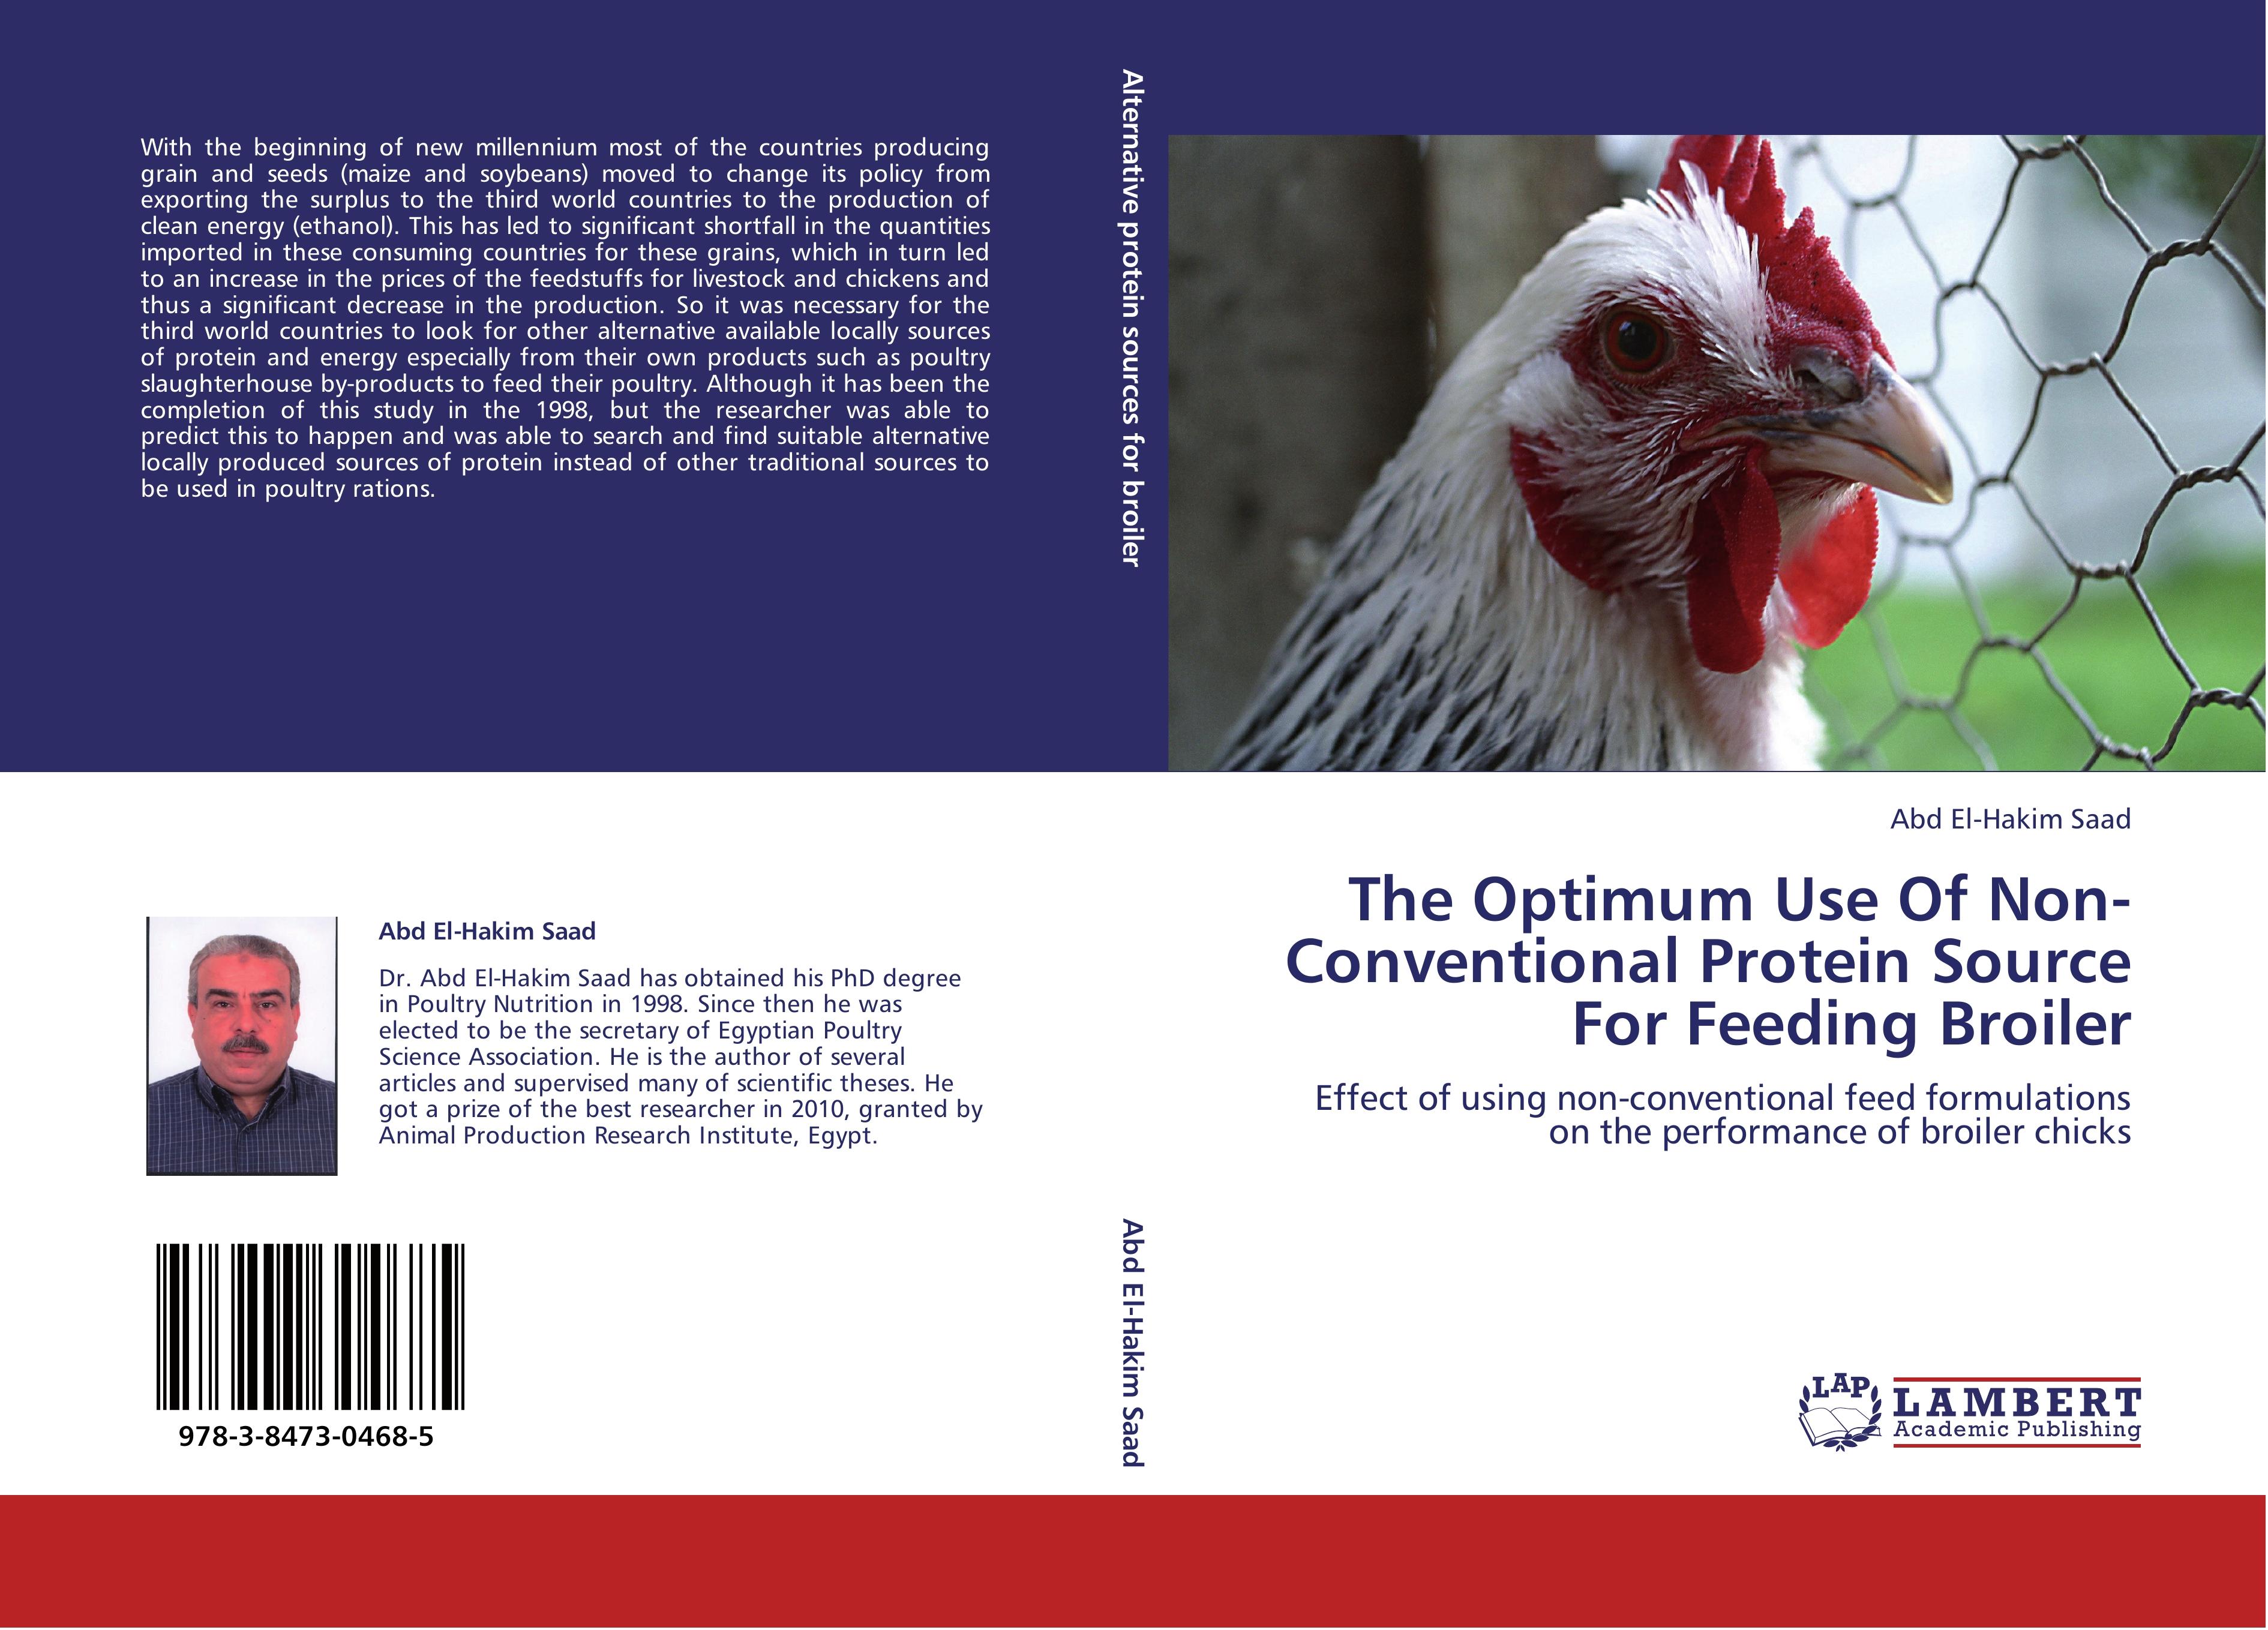 The Optimum Use Of Non-Conventional Protein Source For Feeding Broiler / Effect of using non-conventional feed formulations on the performance of broiler chicks / Abd El-Hakim Saad / Taschenbuch - Saad, Abd El-Hakim